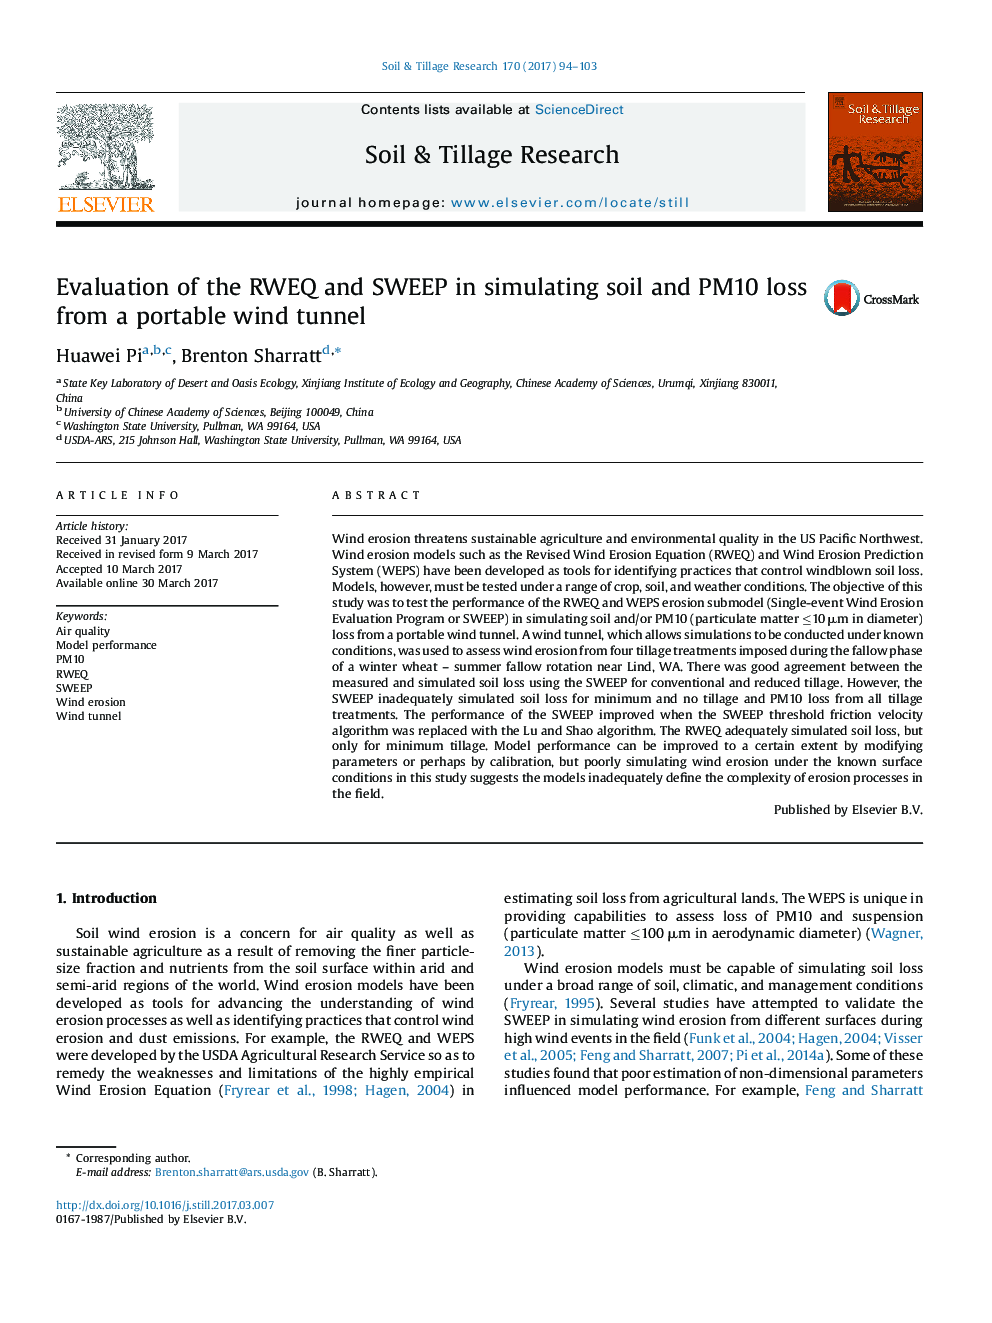 Evaluation of the RWEQ and SWEEP in simulating soil and PM10 loss from a portable wind tunnel